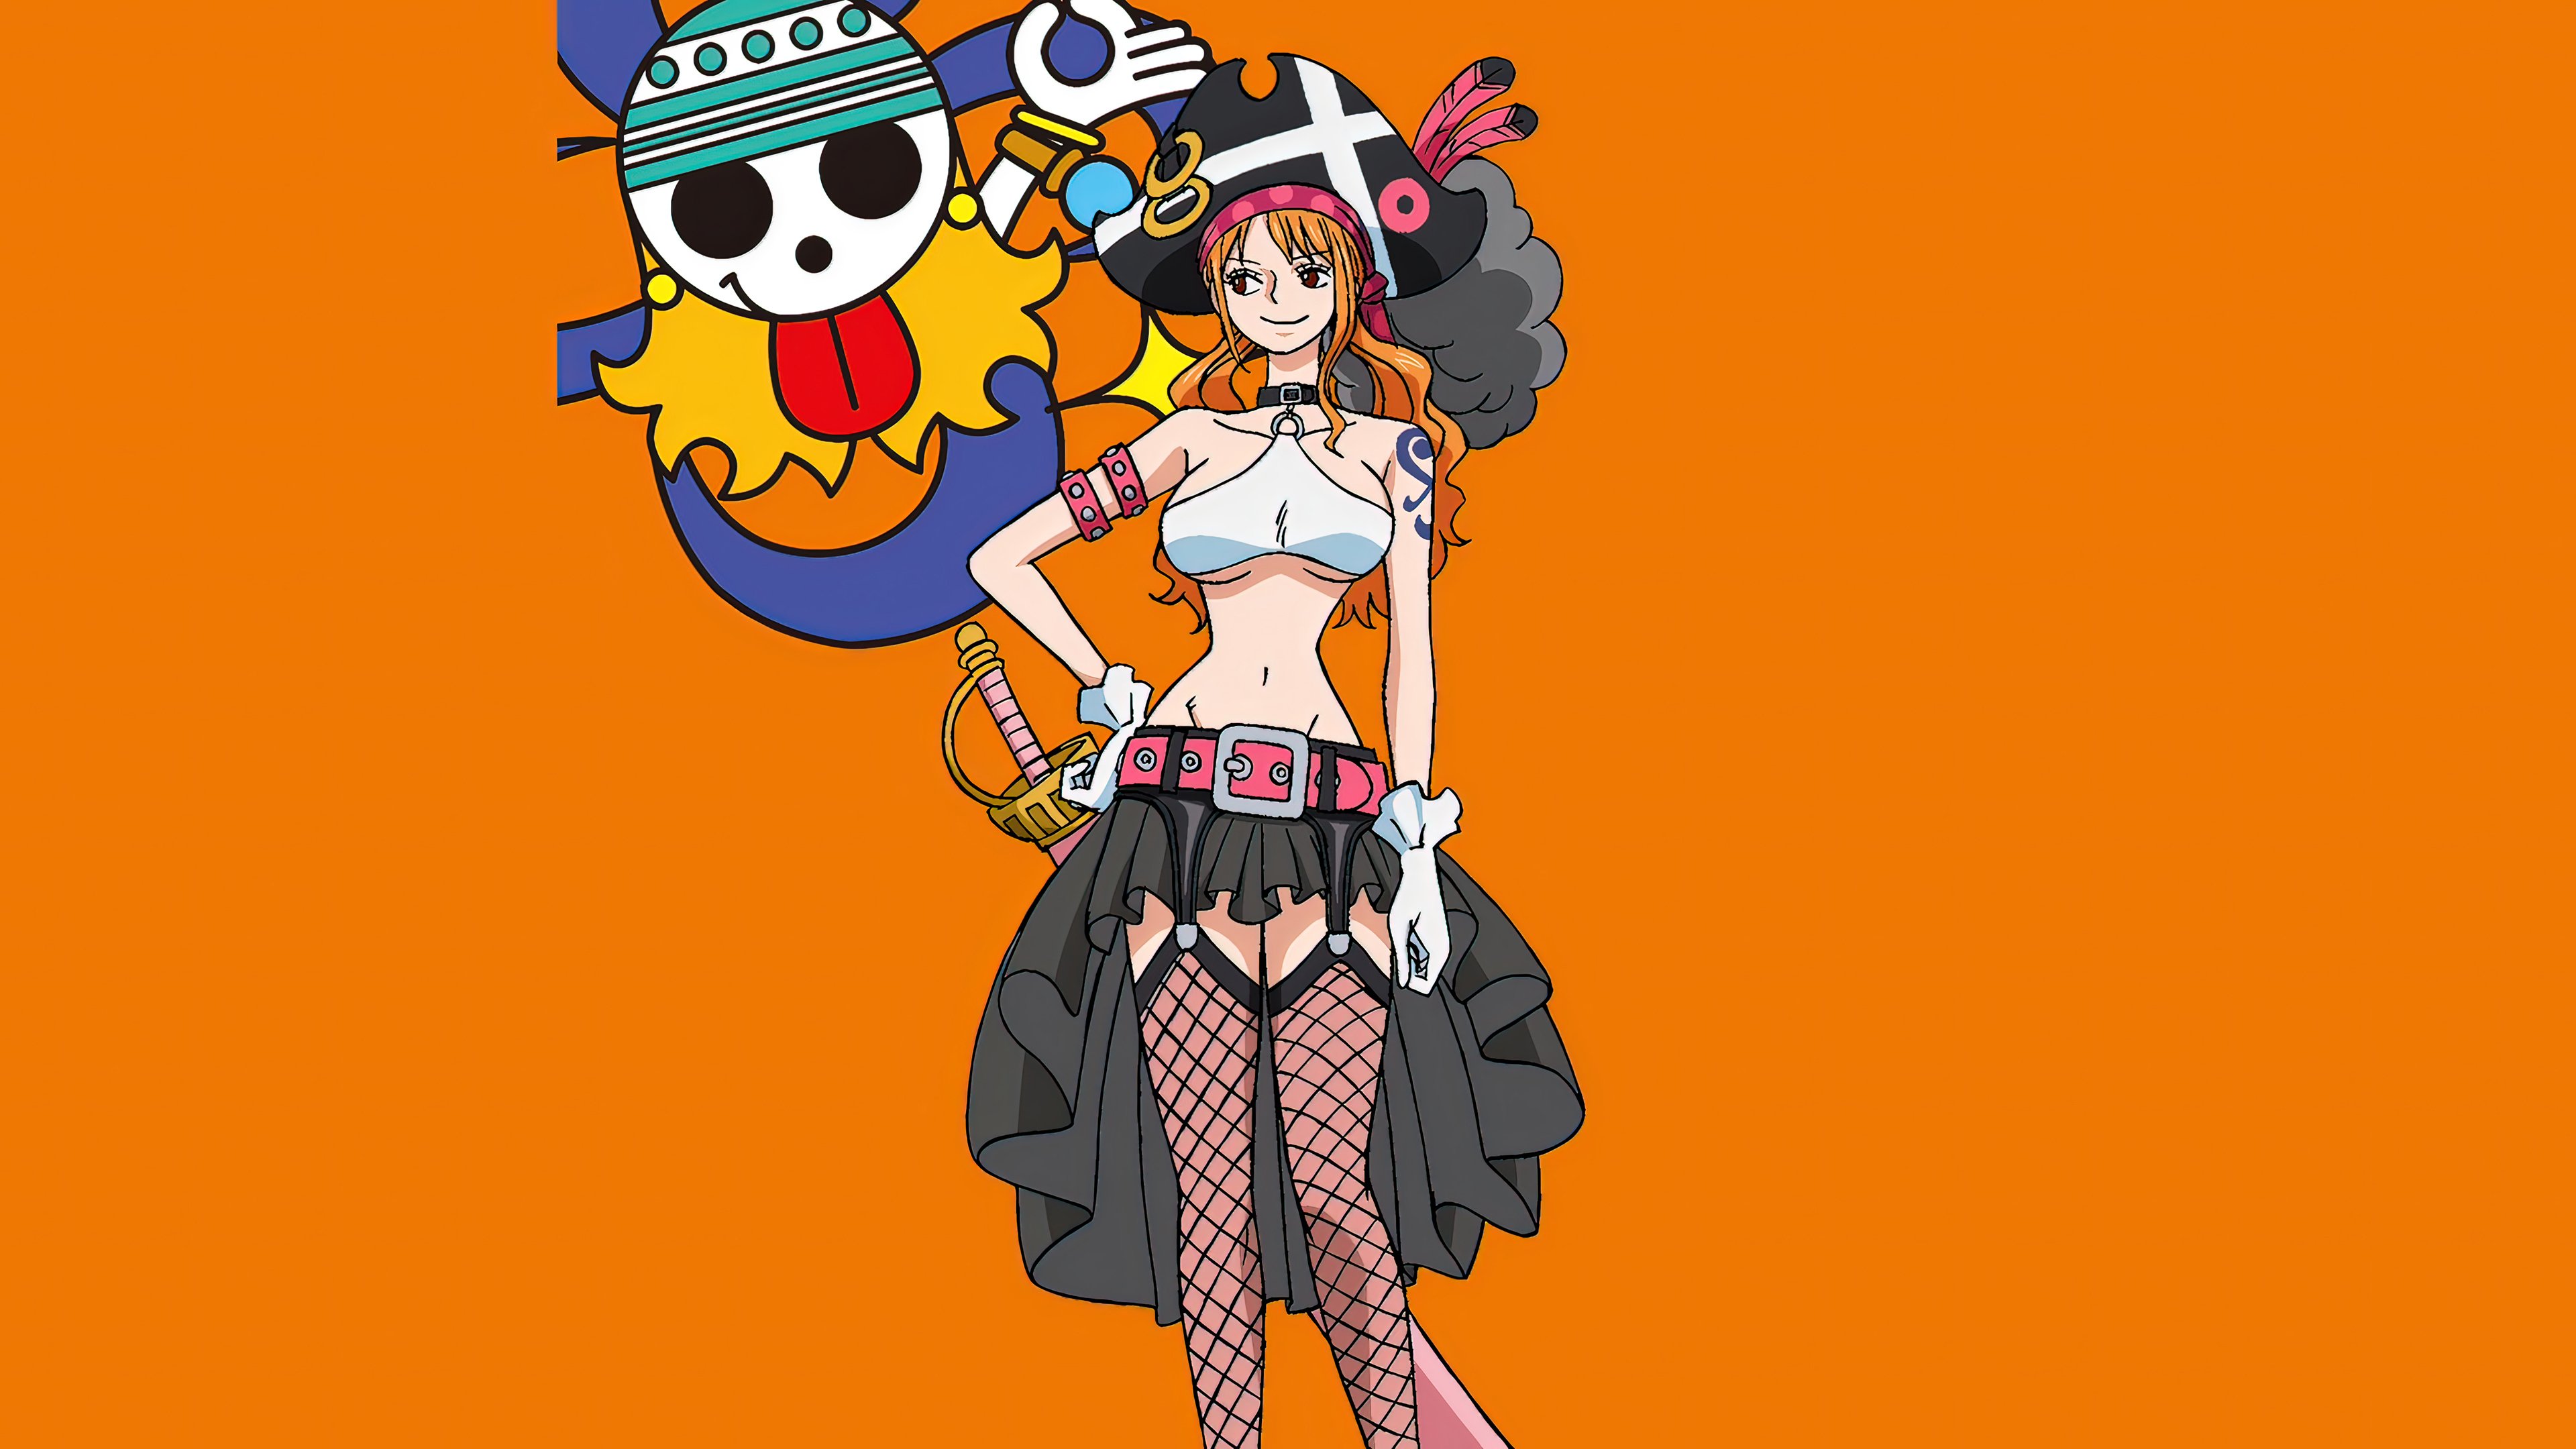 Nami One Piece Red Anime Wallpaper 4k Ultra HD ID:10687